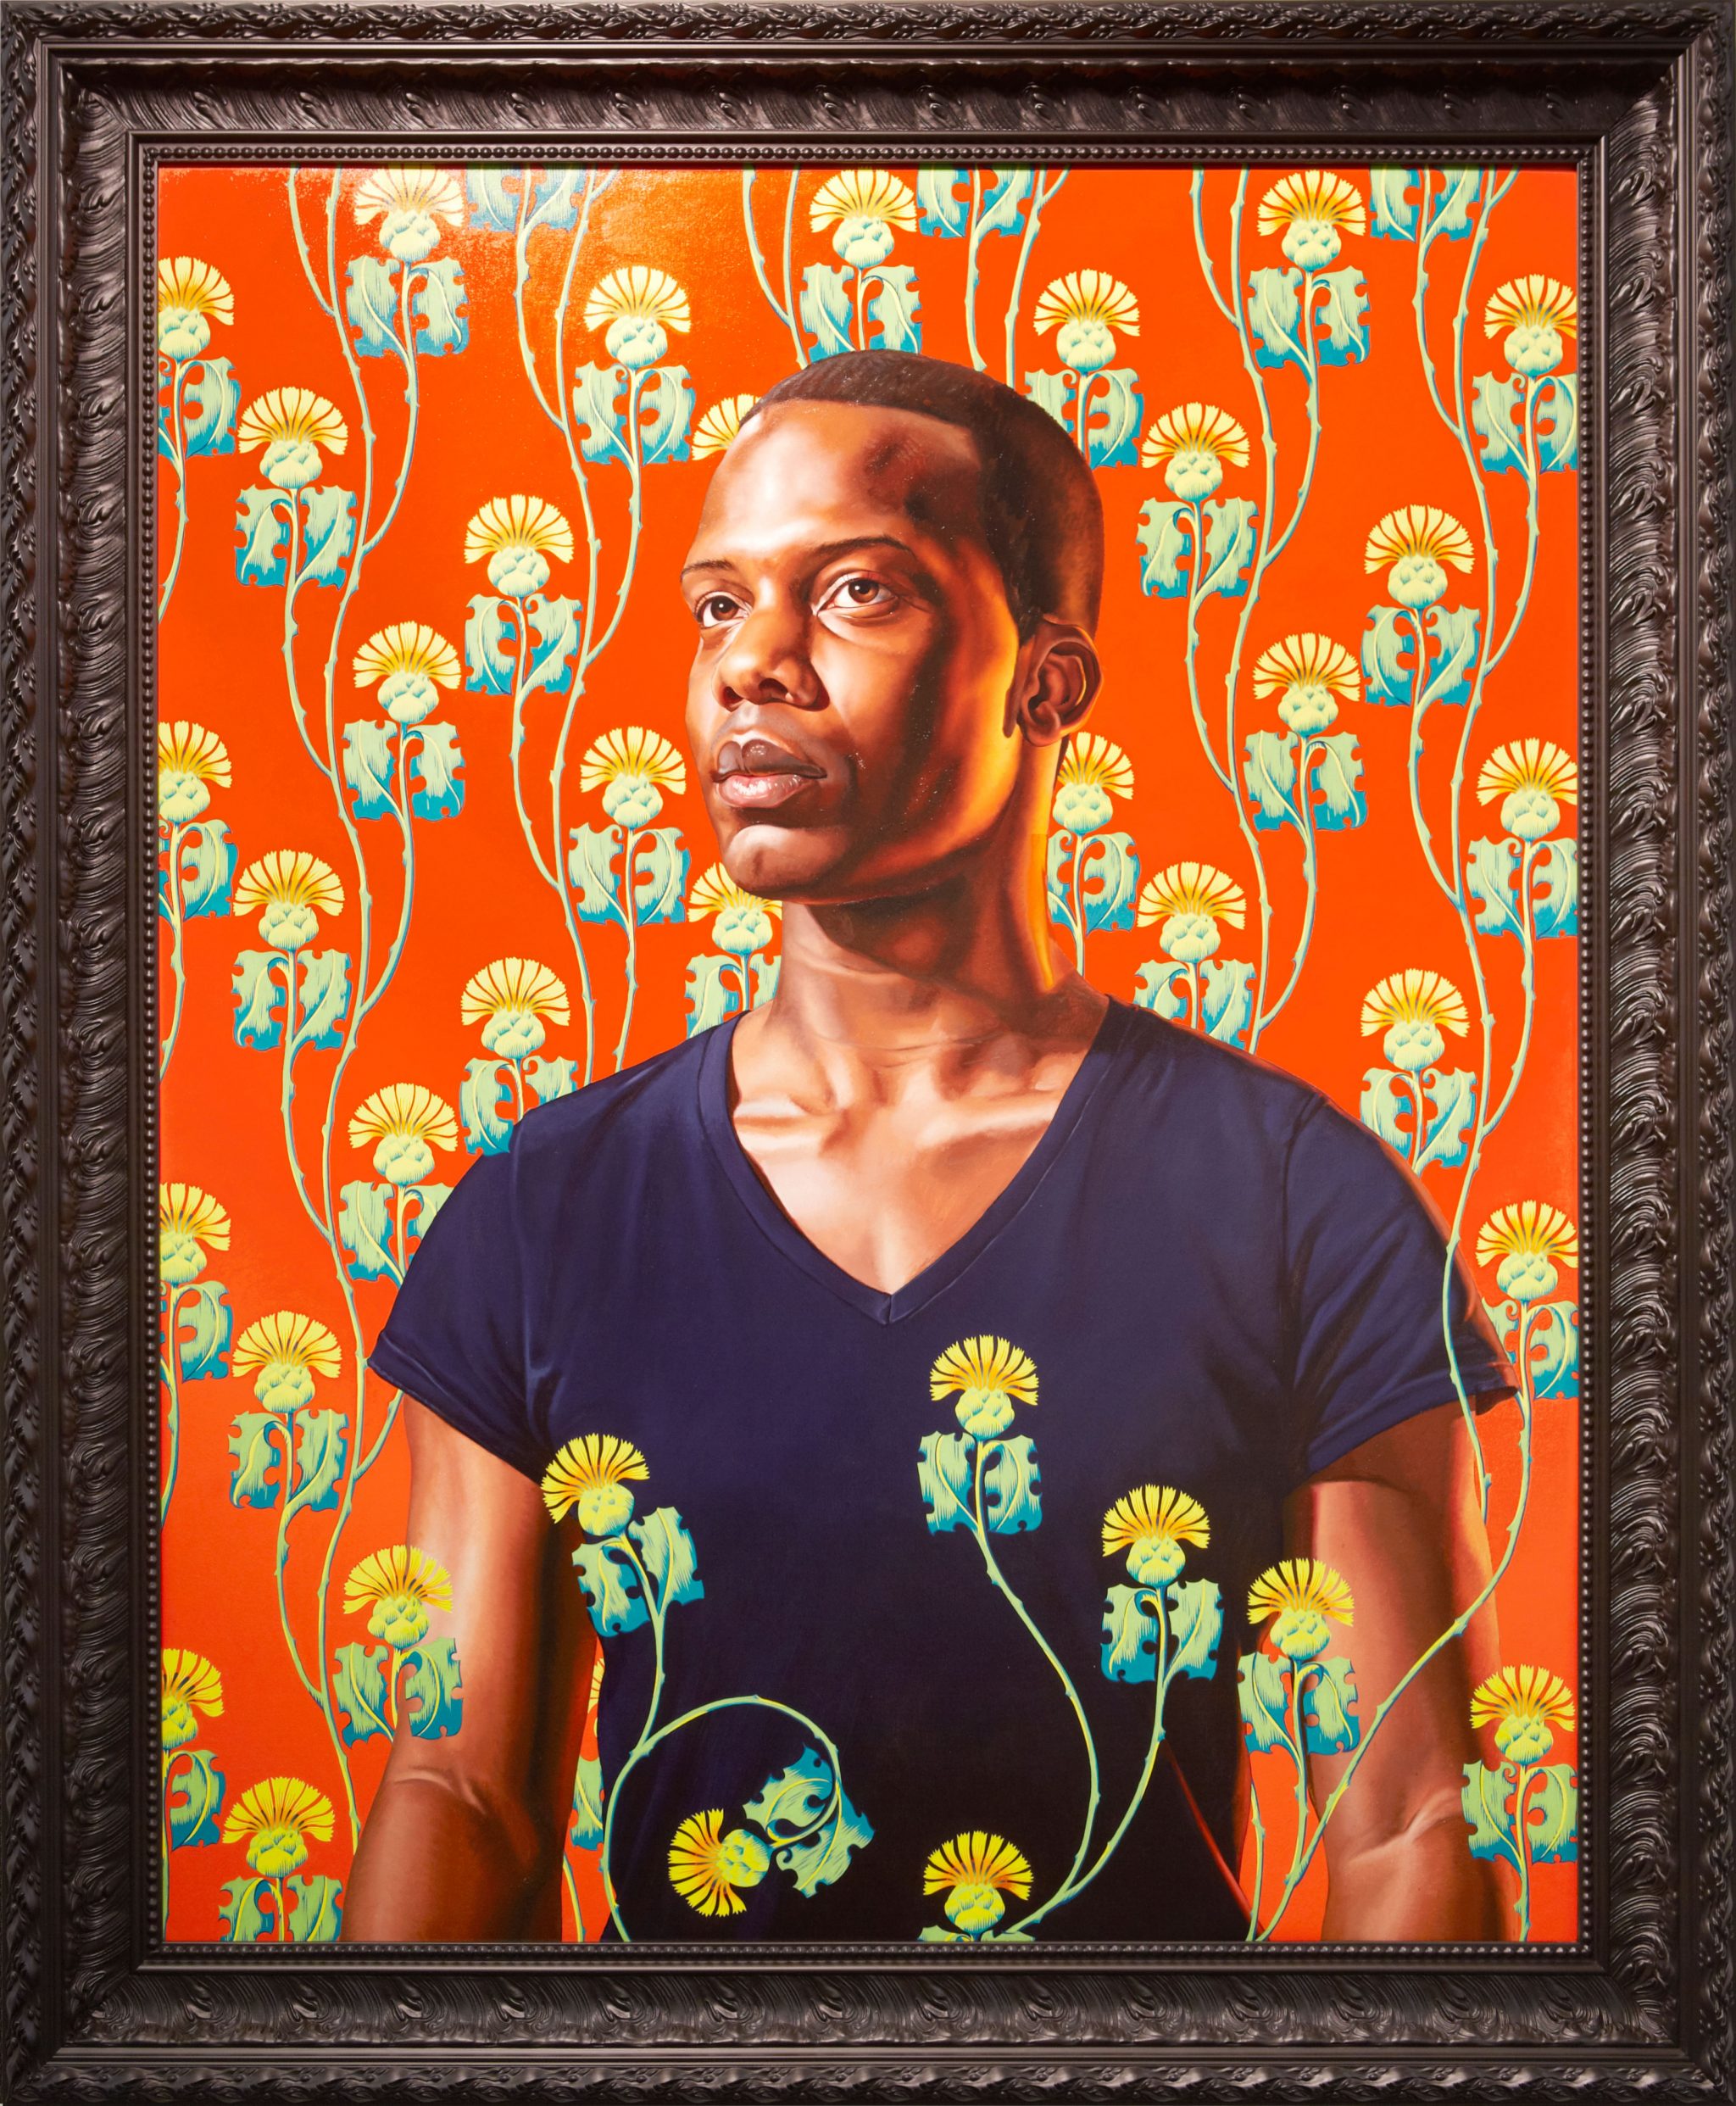 Kehinde Wiley | Selected Works: 2013 | Cleans Browne, 2013, Oil on Canvas. | 4